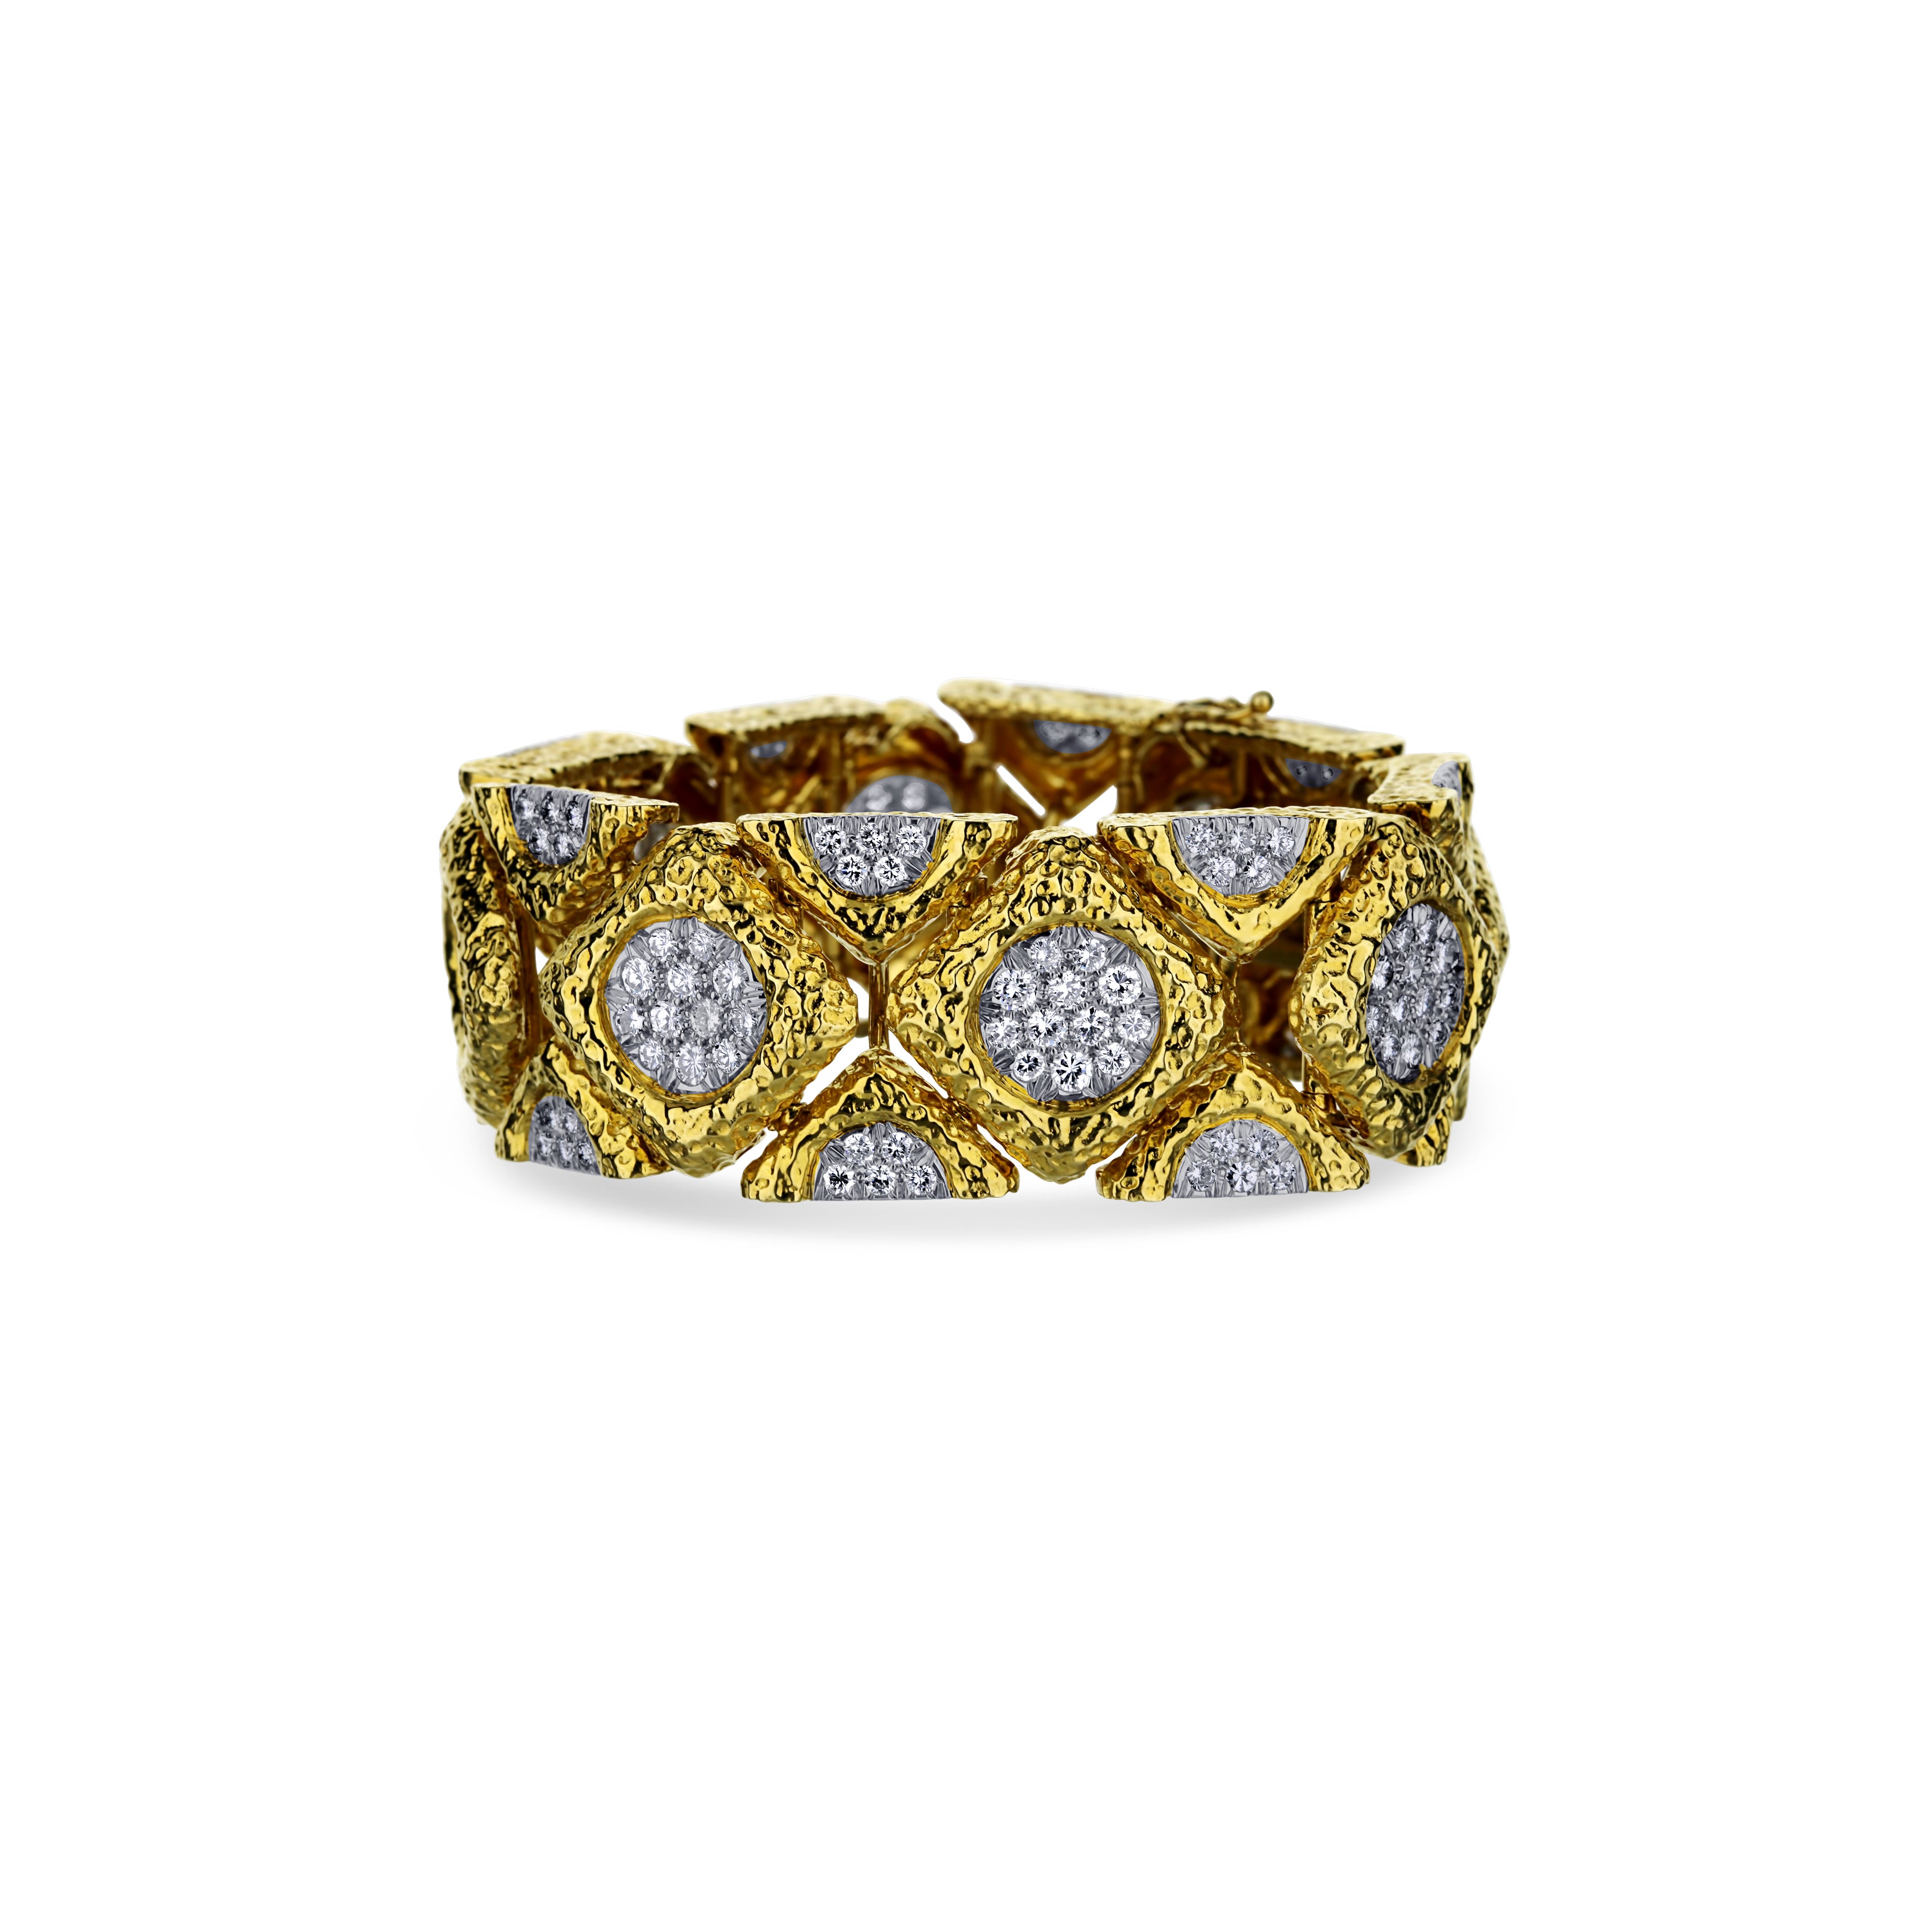 18K Yellow Gold Bracelet With 18K White Gold Pave Circles